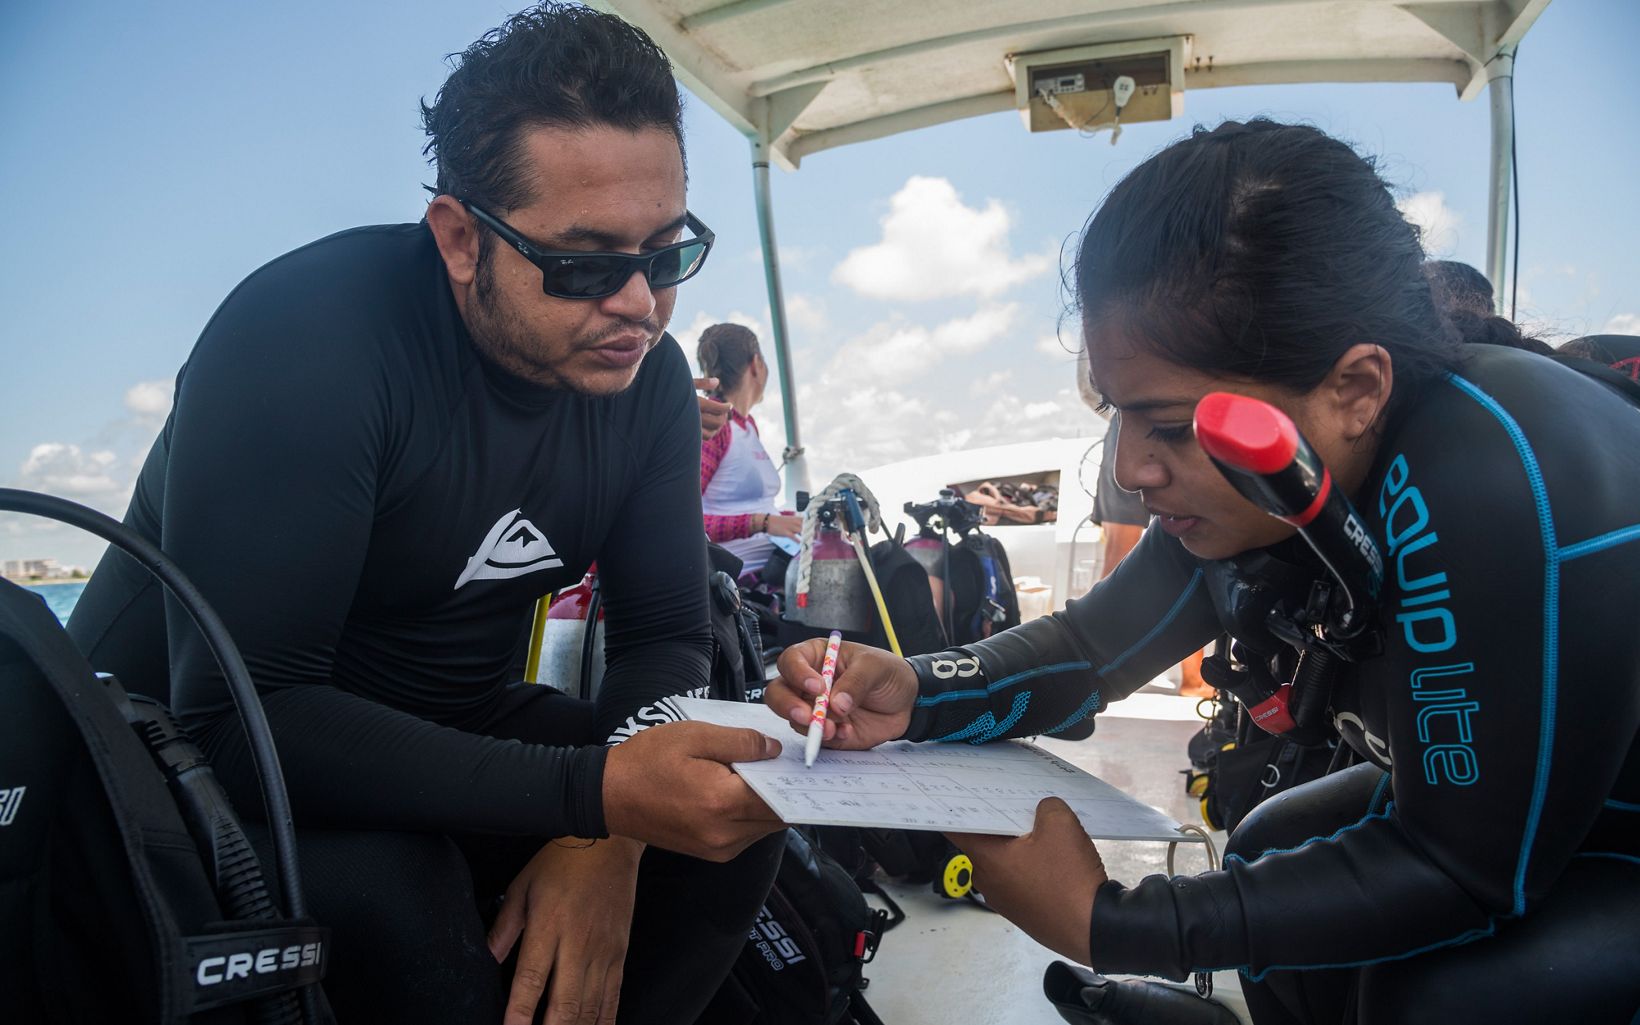 Two divers sit on a boat and work together over a paper on a clipboard.